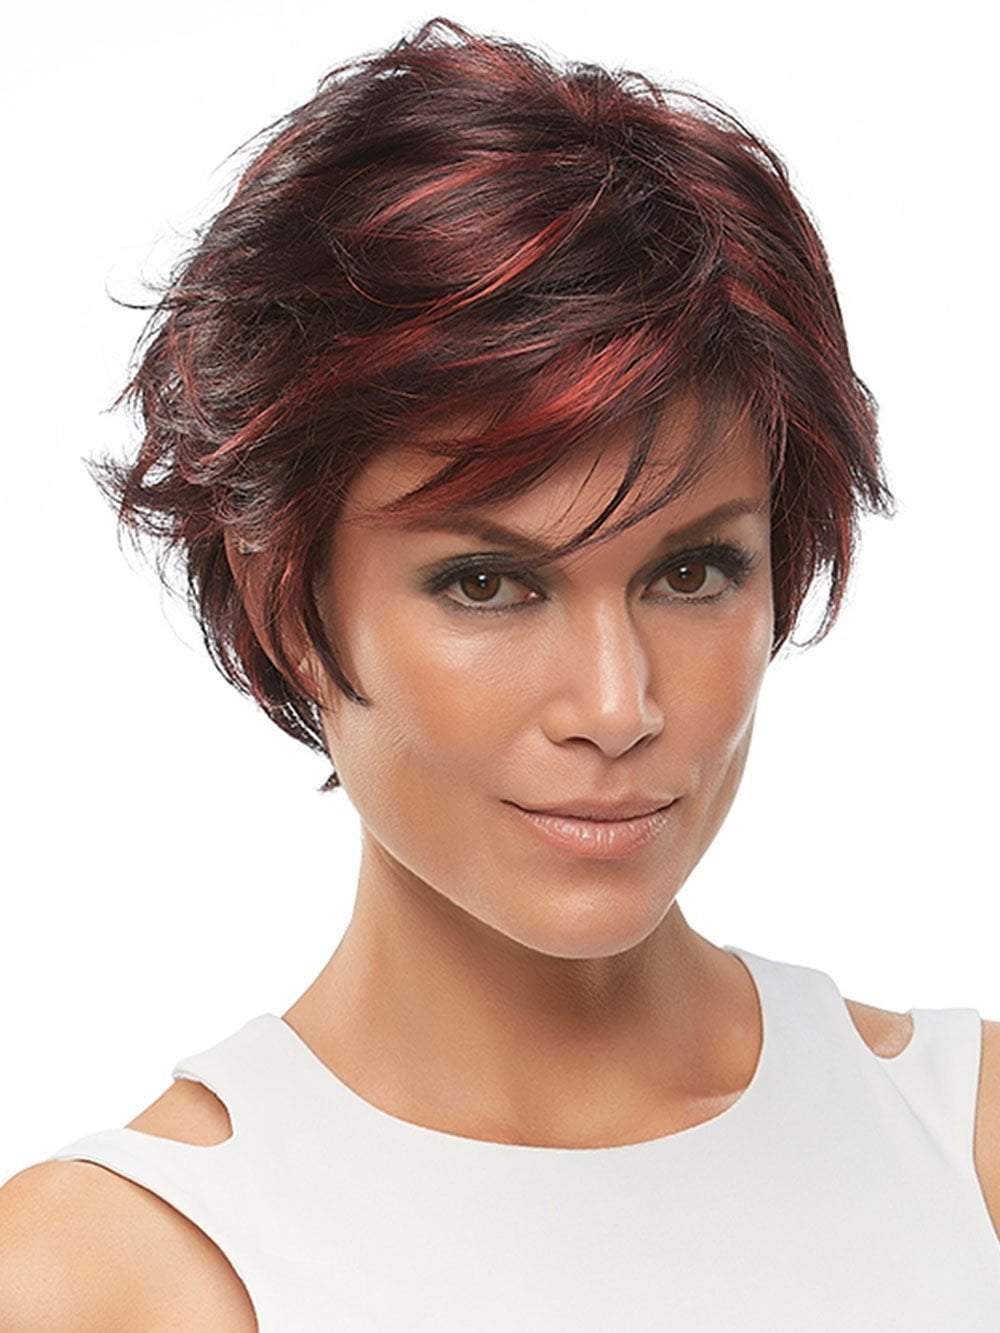 Short, layered, and voluminous synthetic wig with rounded layers